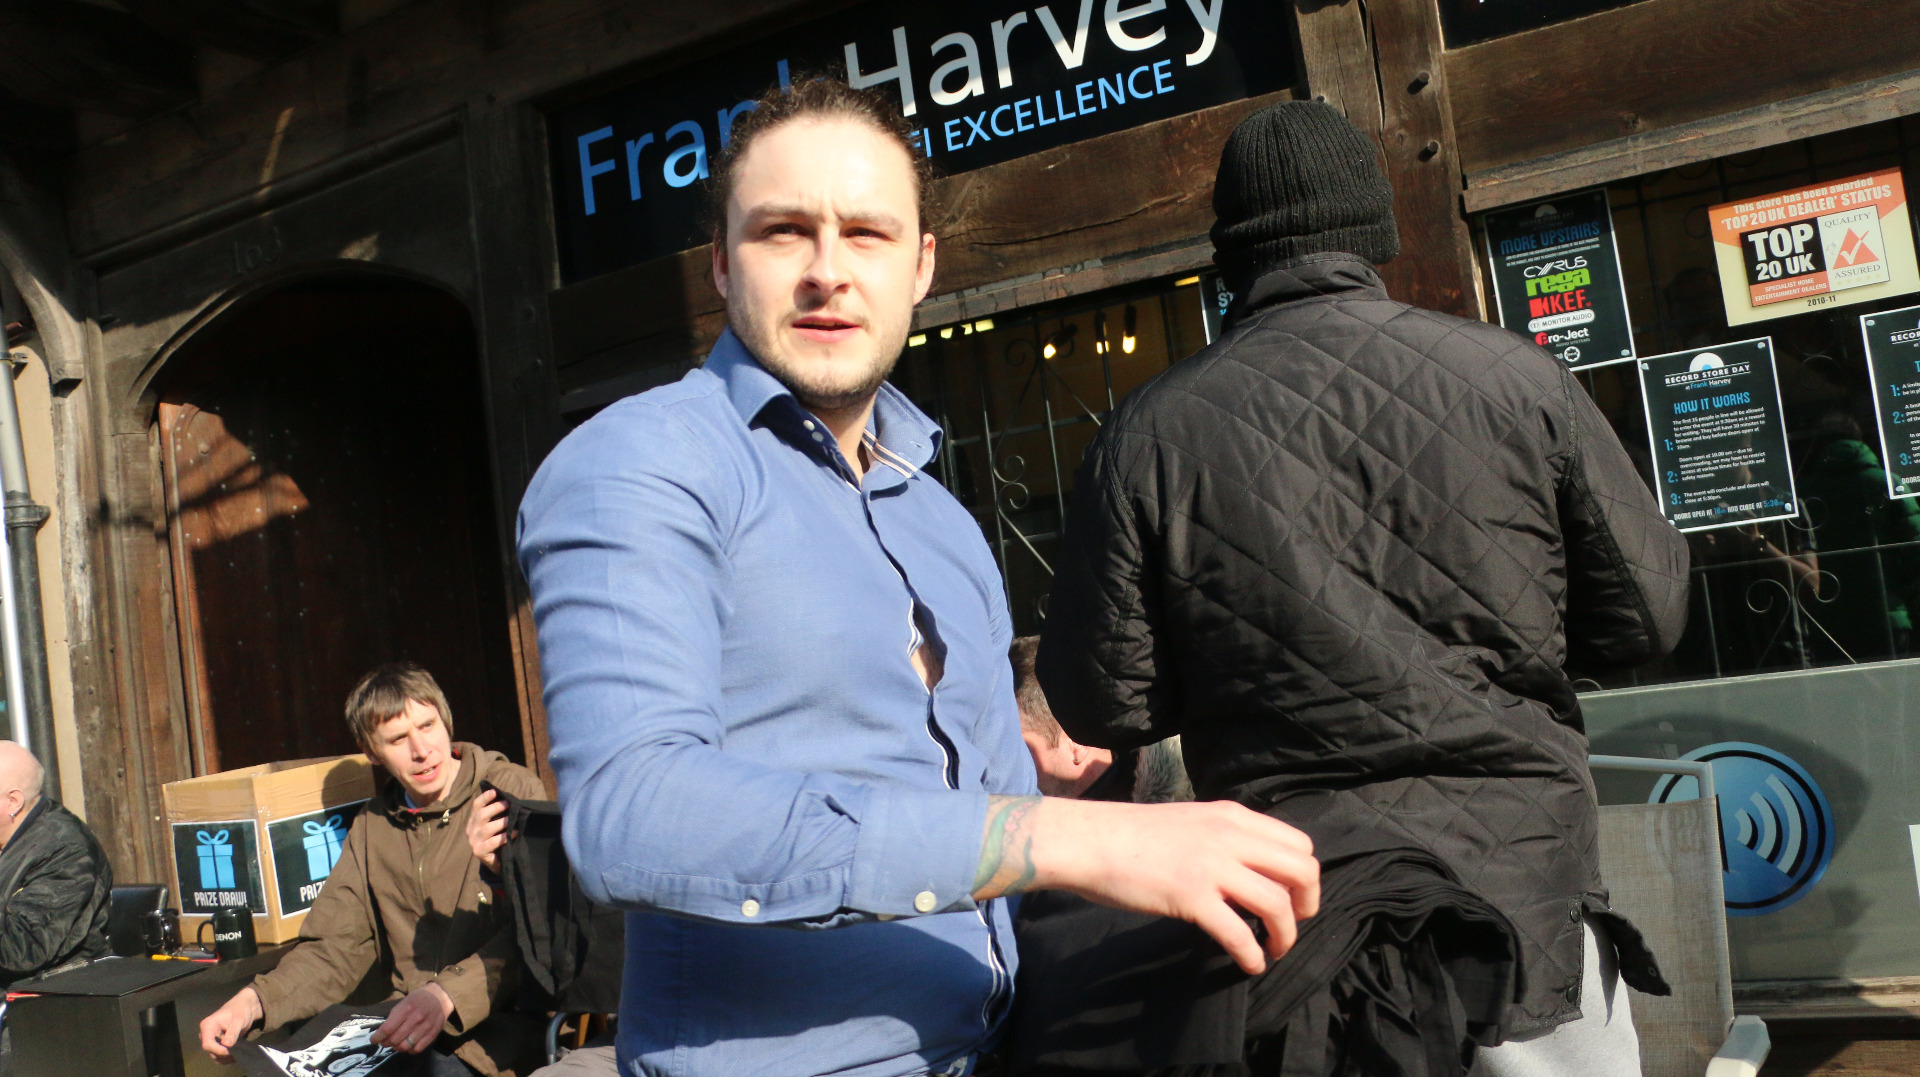 Man standing outside the frank harvey hifi excellence shop on record store day